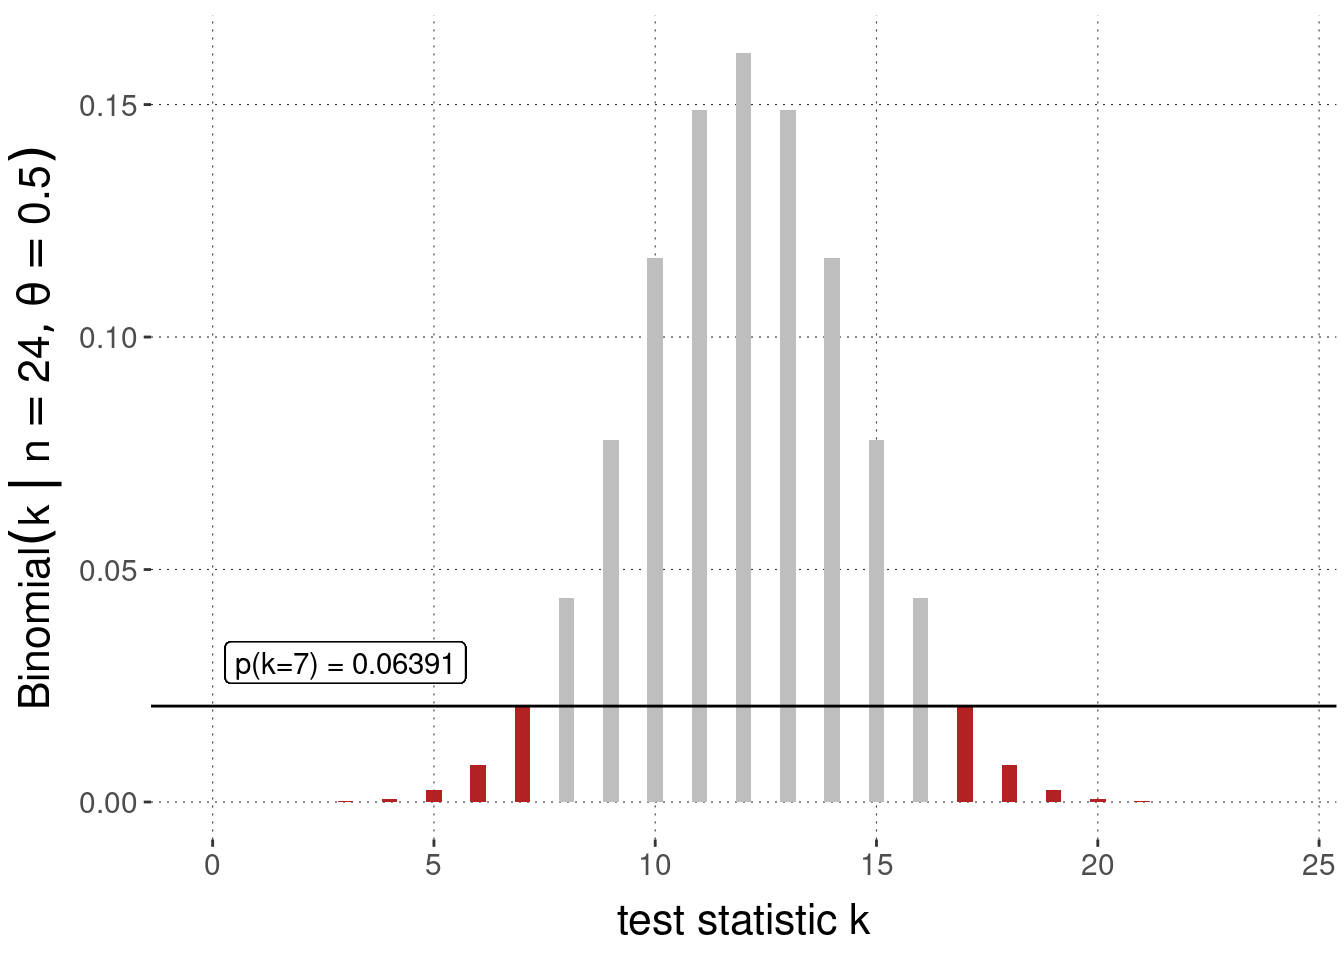 Sampling distribution (Binomial likelihood function) and two-sided $p$-value for the observation of $k=7$ successes in $N = 24$ coin flips, under the assumption of a null hypothesis $\theta = 0.5$.